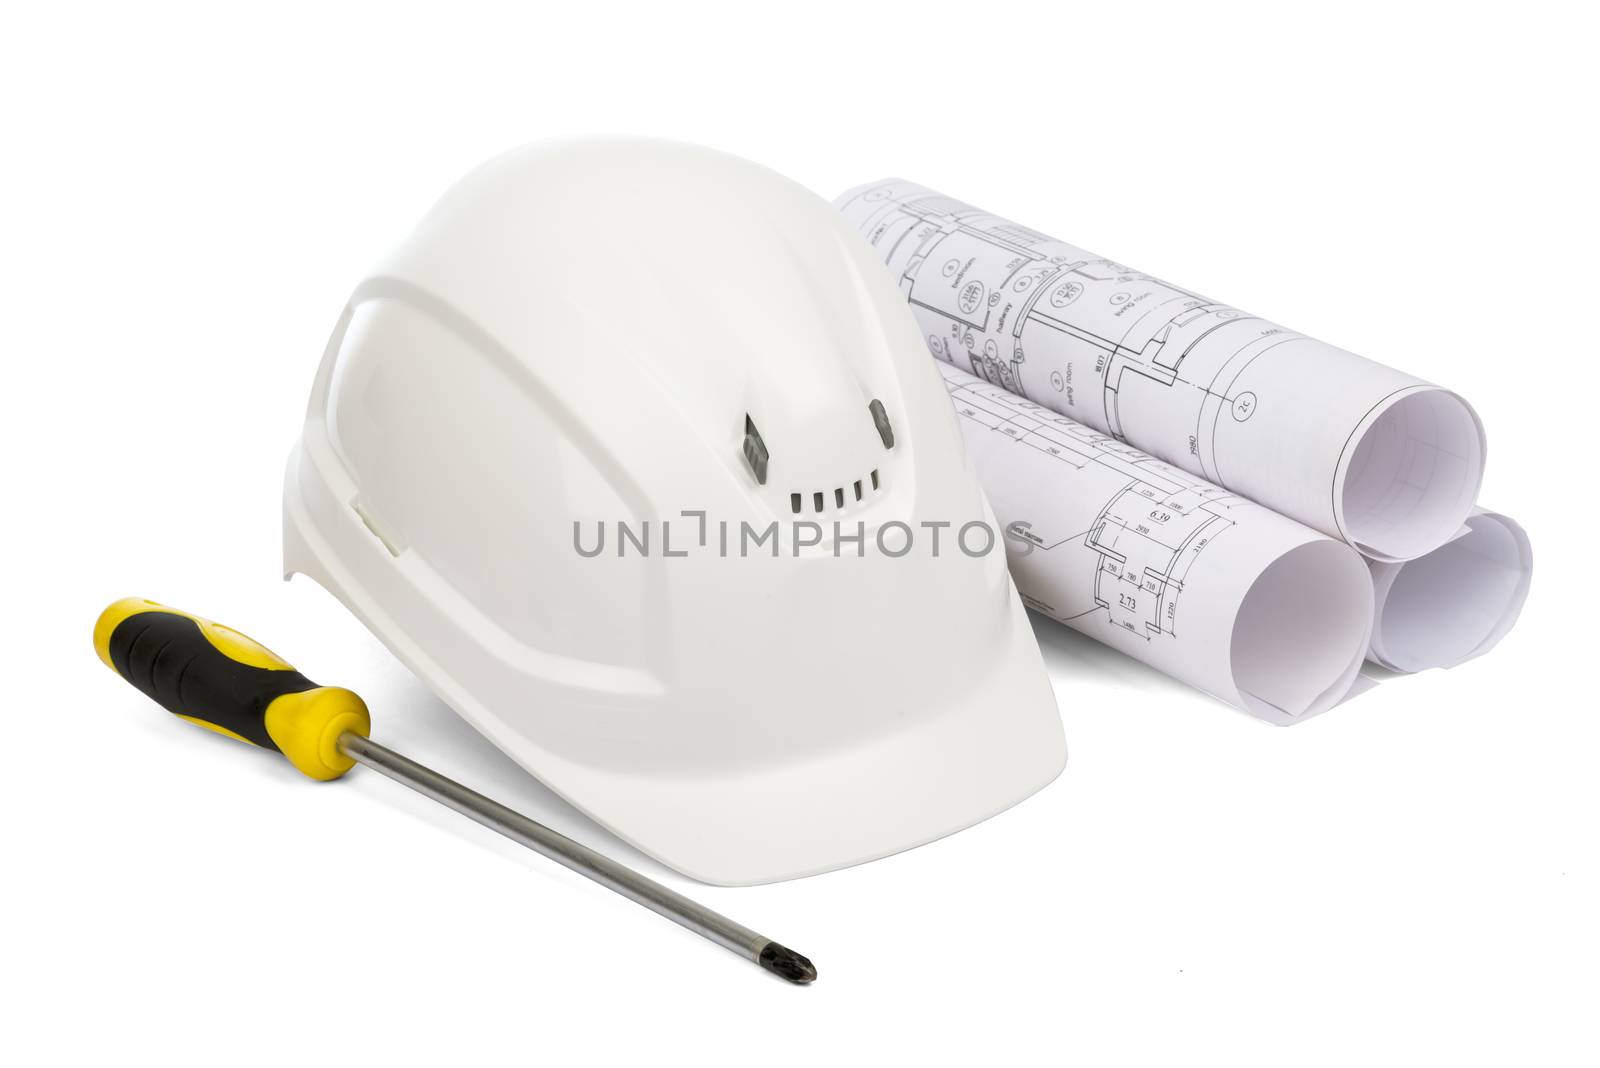 Safety helmet and screwdriver on isolated white background